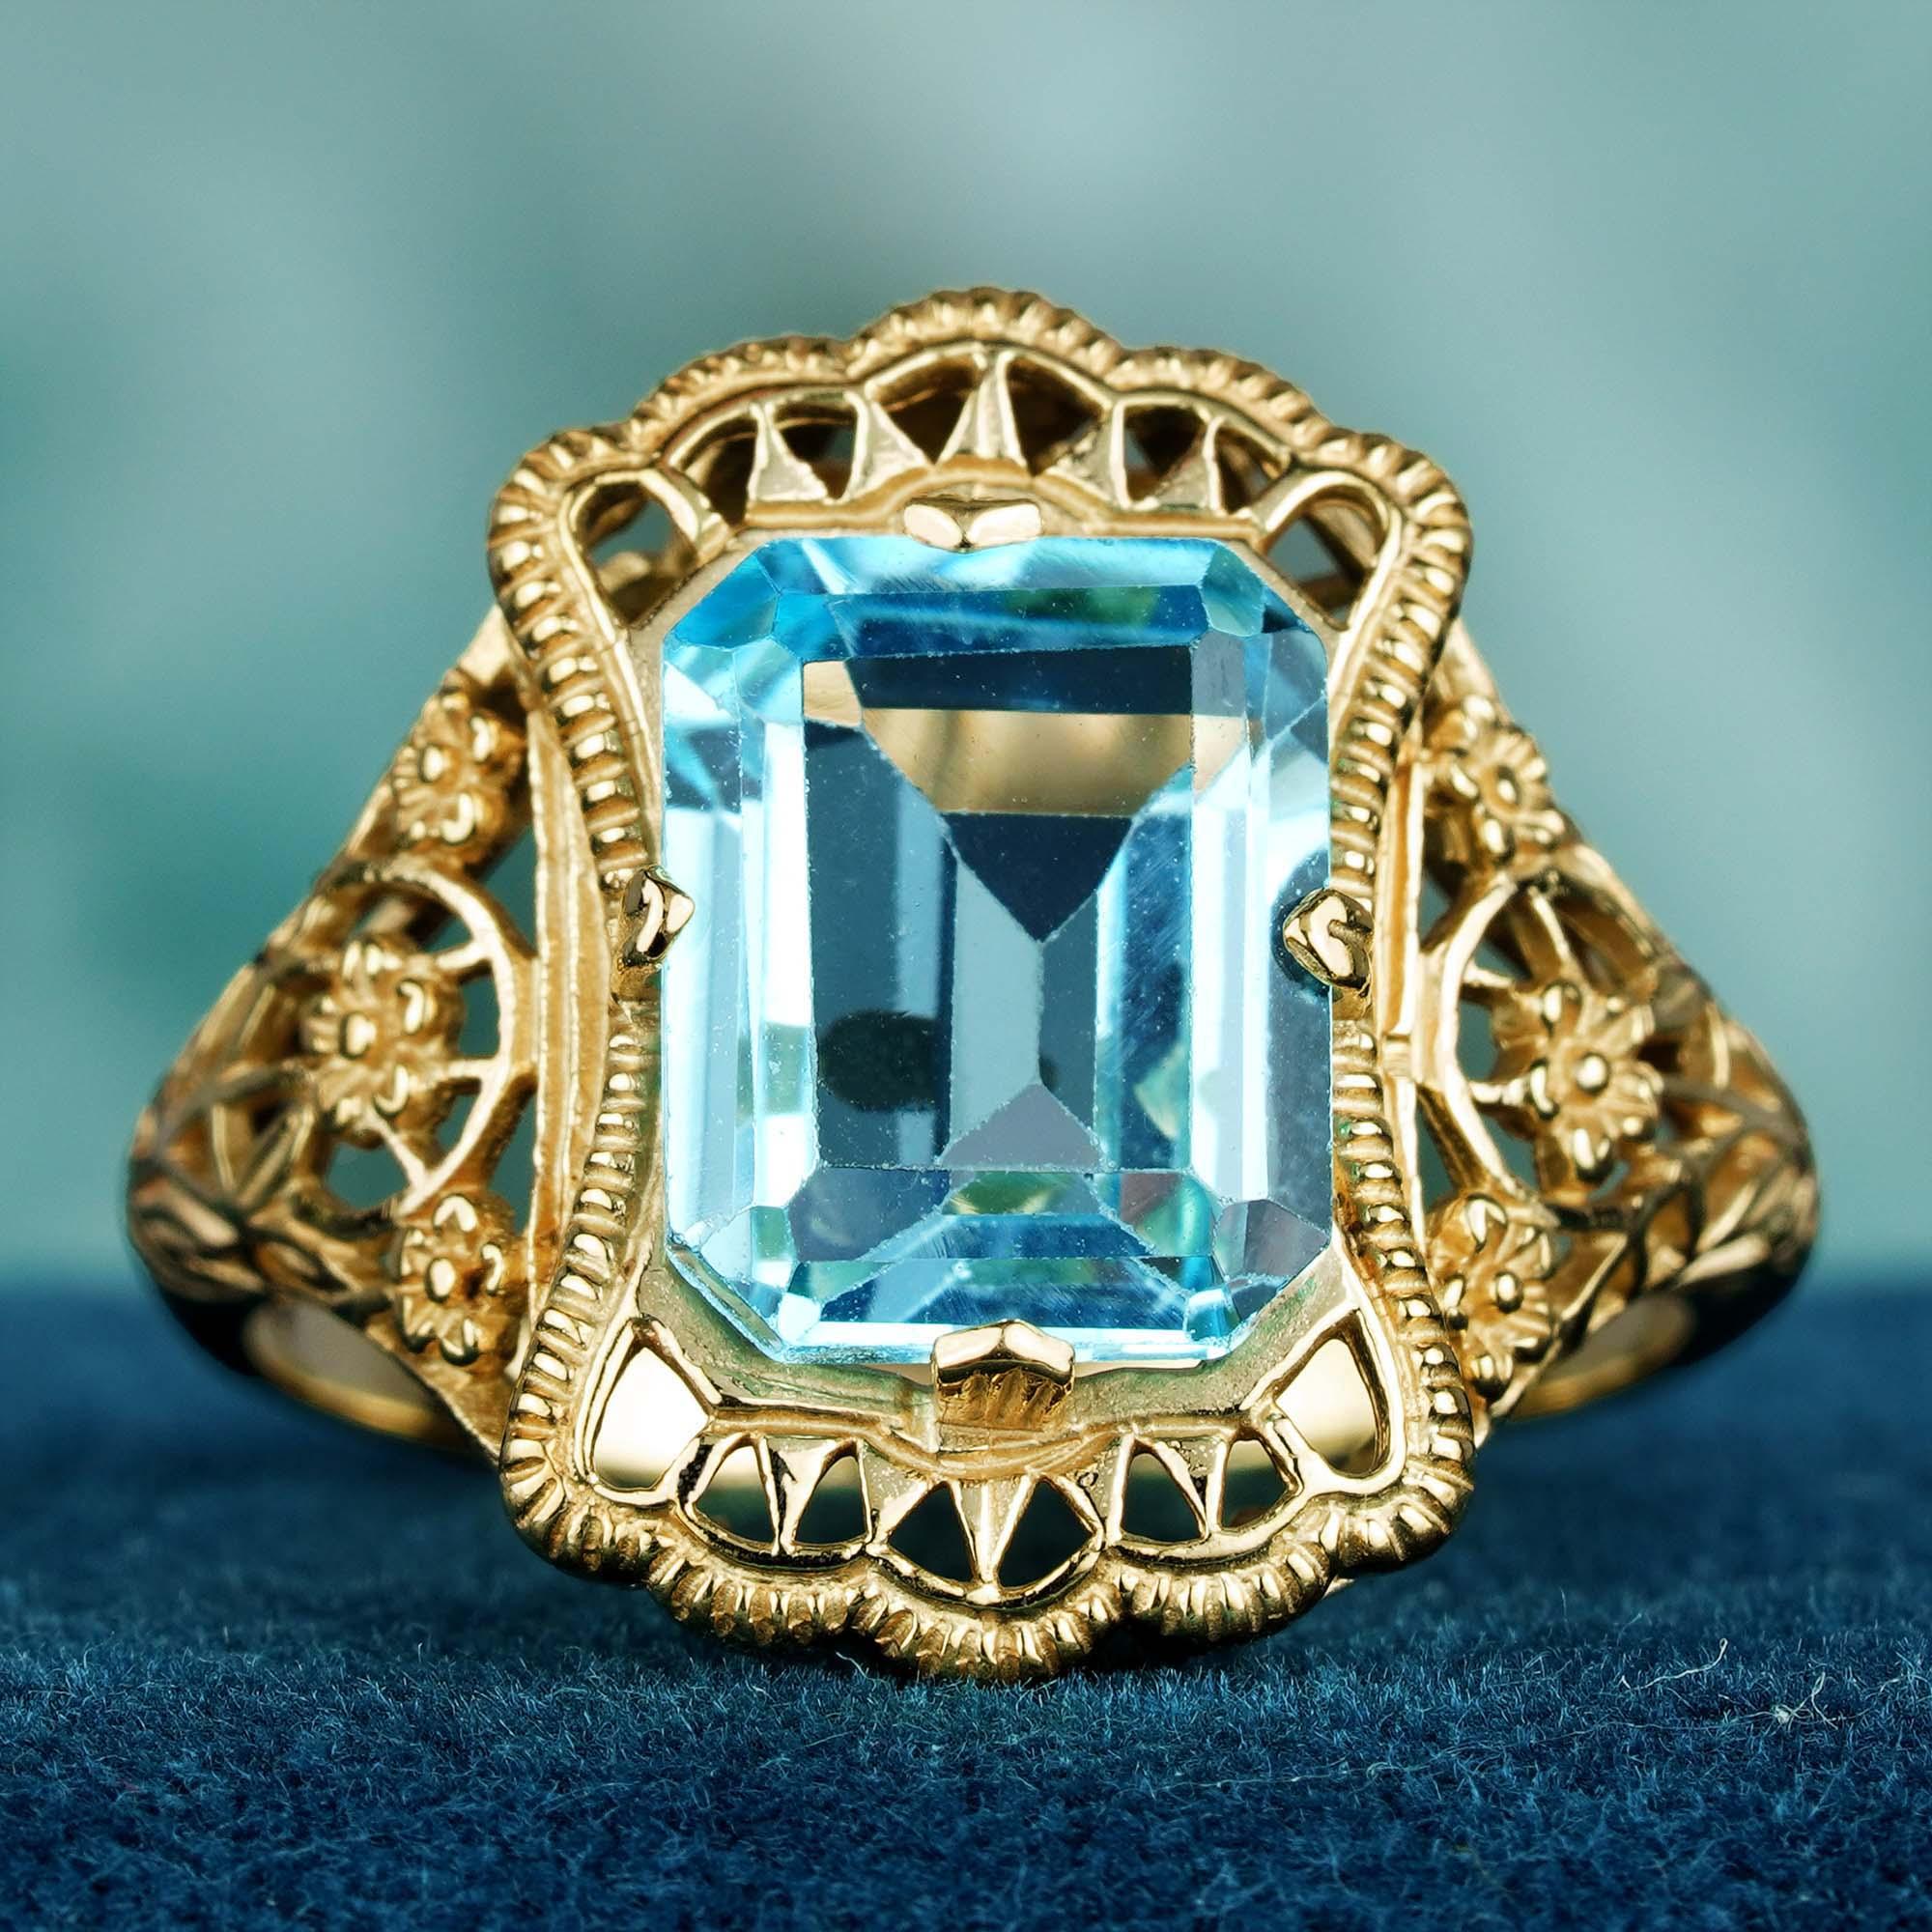 For Sale:  4.50 Ct. Natural Blue Topaz Vintage Style Filigree Ring in Solid 9K Yellow Gold 3